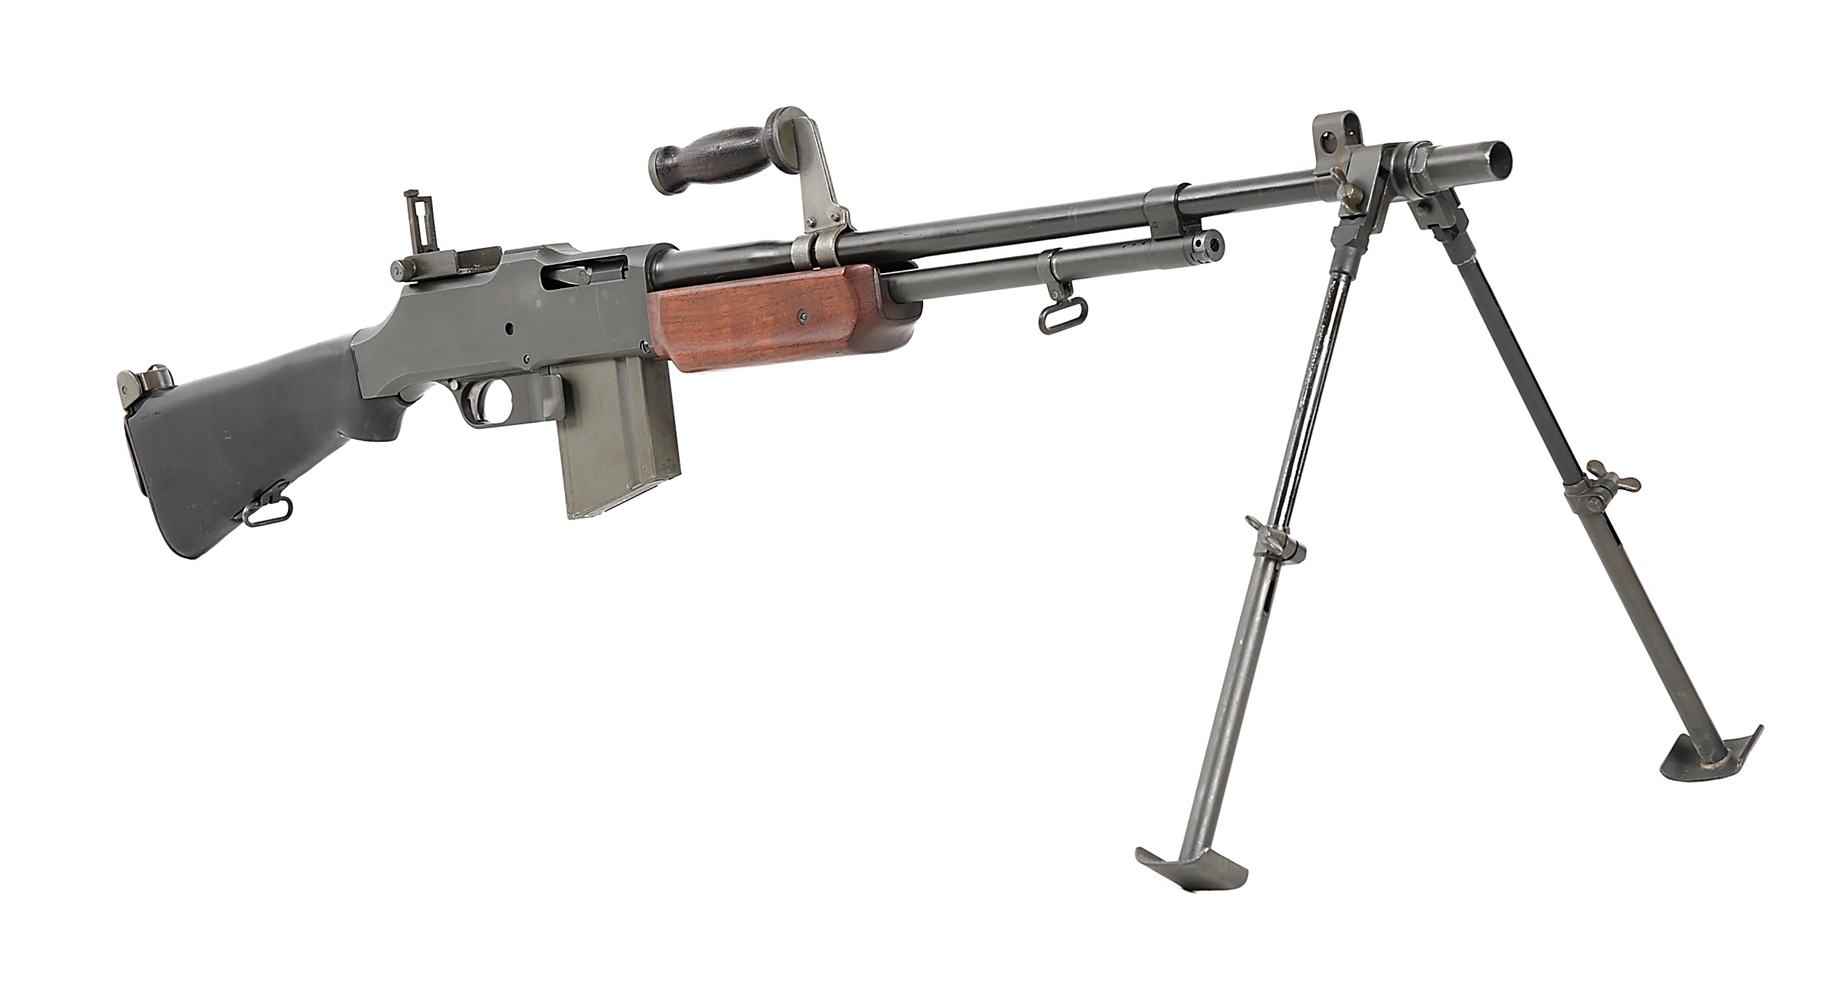 (N) HIGH CONDITION EARLY GROUP INDUSTRIES MODEL 1918A2 BROWNING AUTOMATIC RIFLE B.A.R. MACHINE GUN (FULLY TRANSFERABLE).